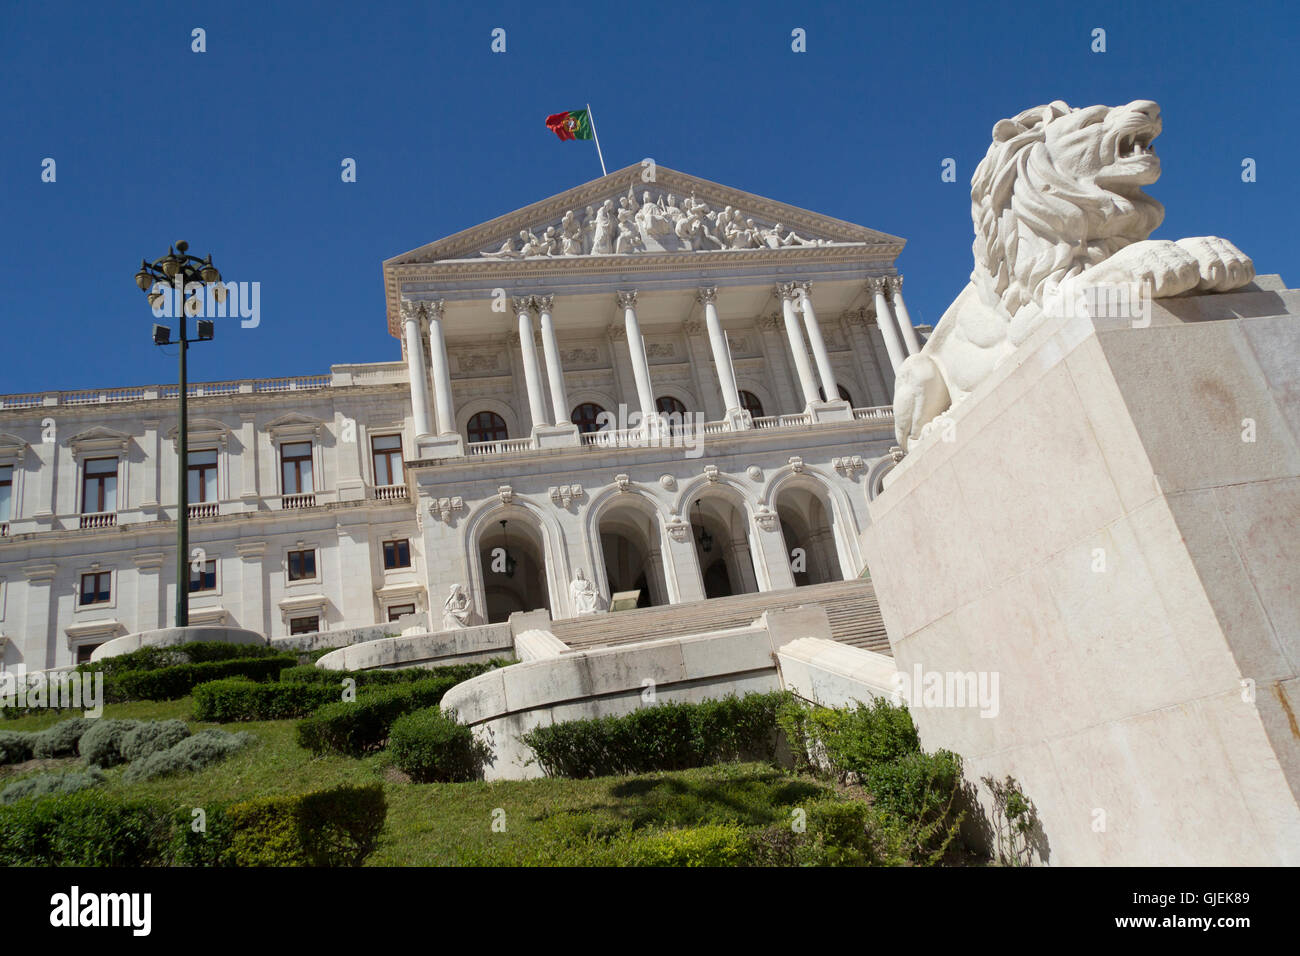 Lisbon’s São Bento Palace (Saint Benedict's Palace) is the home of the Assembly of the Republic, the Portuguese parliament. Stock Photo